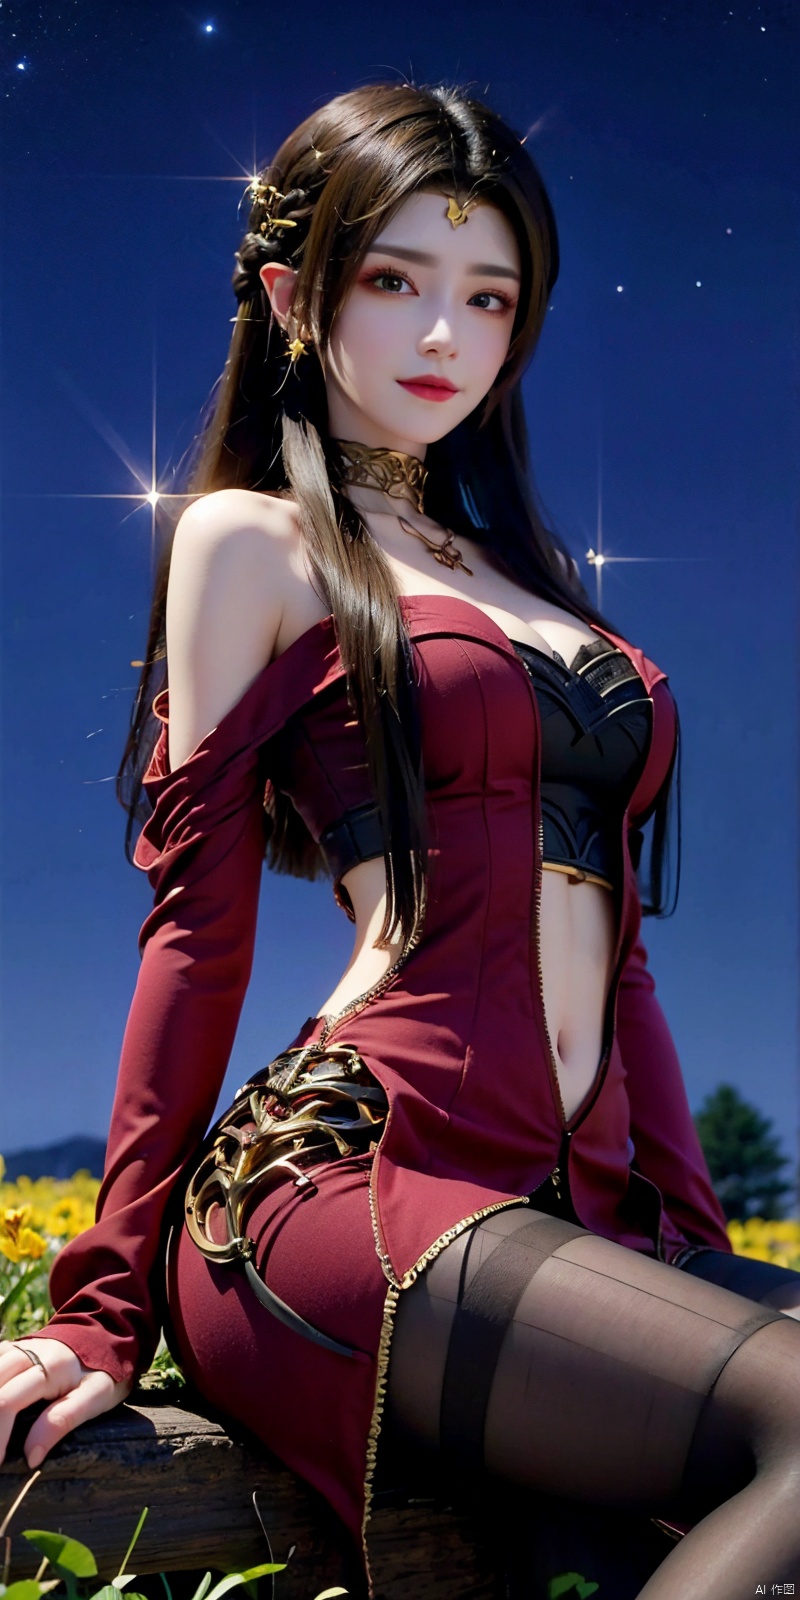  (Good structure),cowboy_shot,Girl in the Flower Field of Lycoris. Sitting in a clearing. 
Long elaborate hairstyle with loose hair and braids, Beautiful hair clips. Burgundy lipstick.
Long fluffy black and burgundy luxury dress,crop top , Elegant clothes. 
 Lycoris petals fly in the wind. 
Esthetics. Good Quality. 
Night., more_details, , starrystarscloudcolorful, moon, night, moonlight, beautiful starry sky,blackpantyhose,looking_at_viewer,kind smile,Dynamic pose,  meidusha